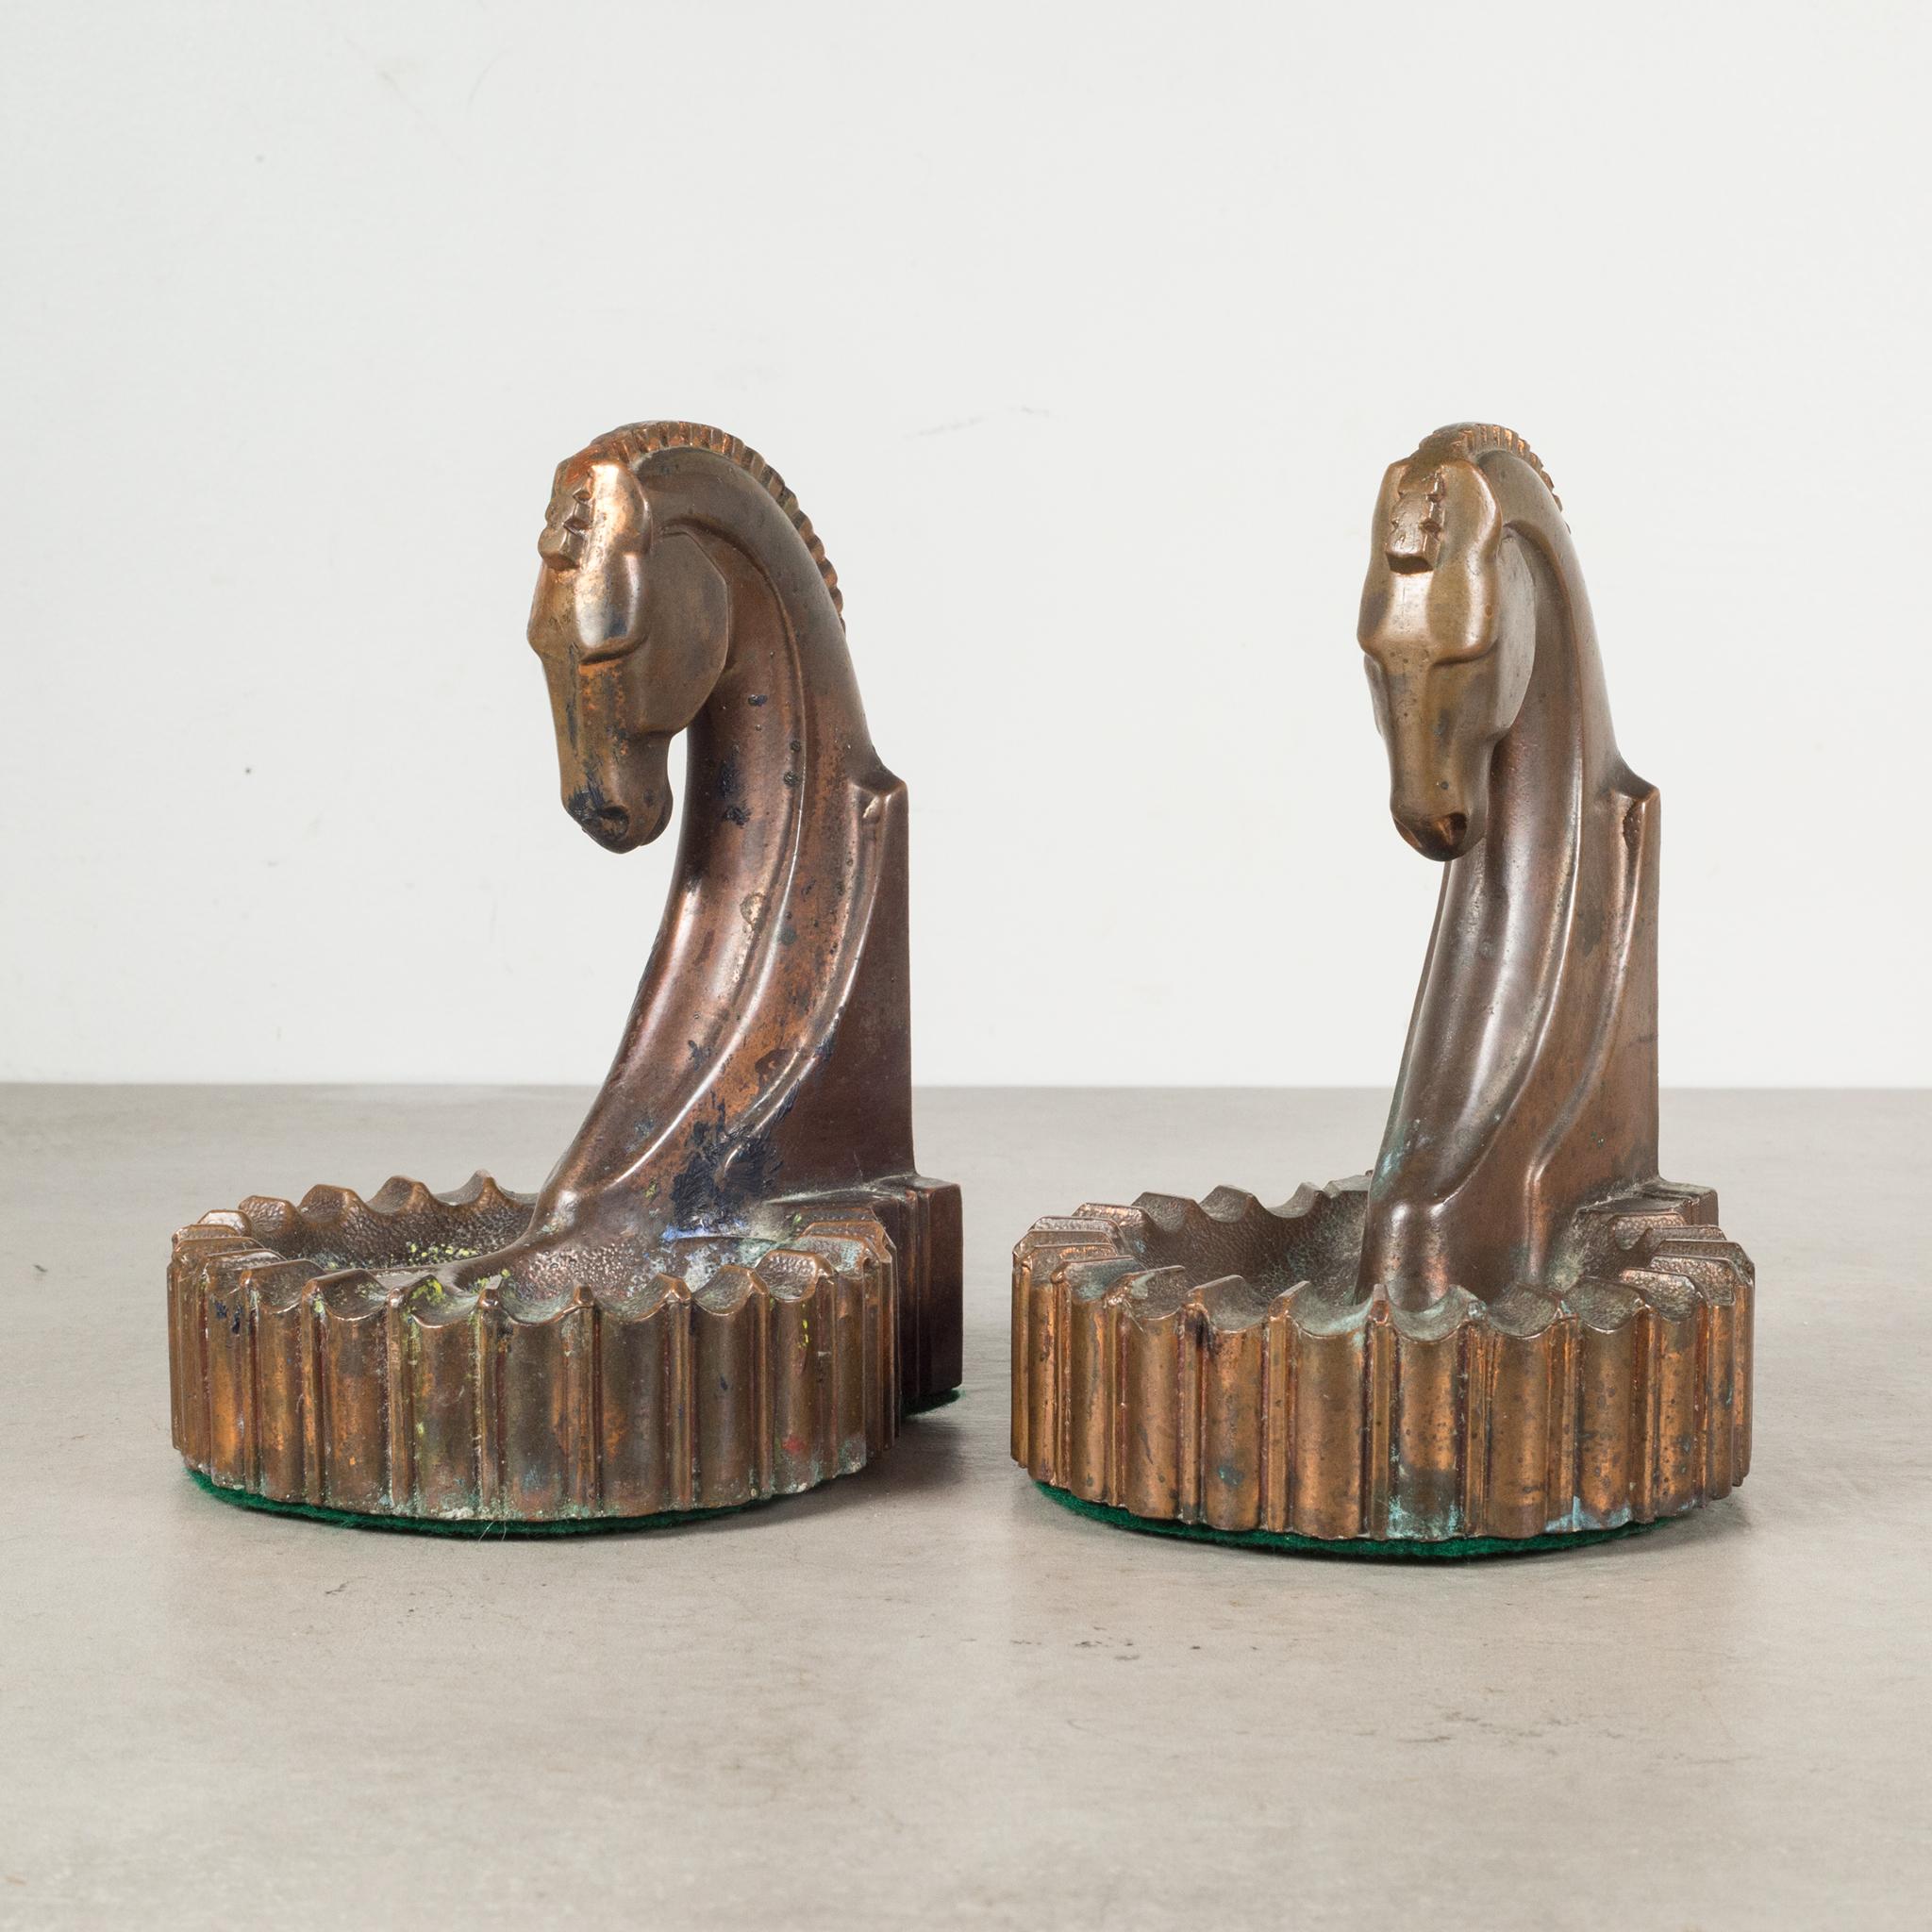 About

This is an original pair of Art Deco style cast metal Trojan horse bookends with ashtray on one side and pipe holder on the other. Manufactured by either Dodge or Champion Products, Los Angeles USA. Both pieces have retained their original